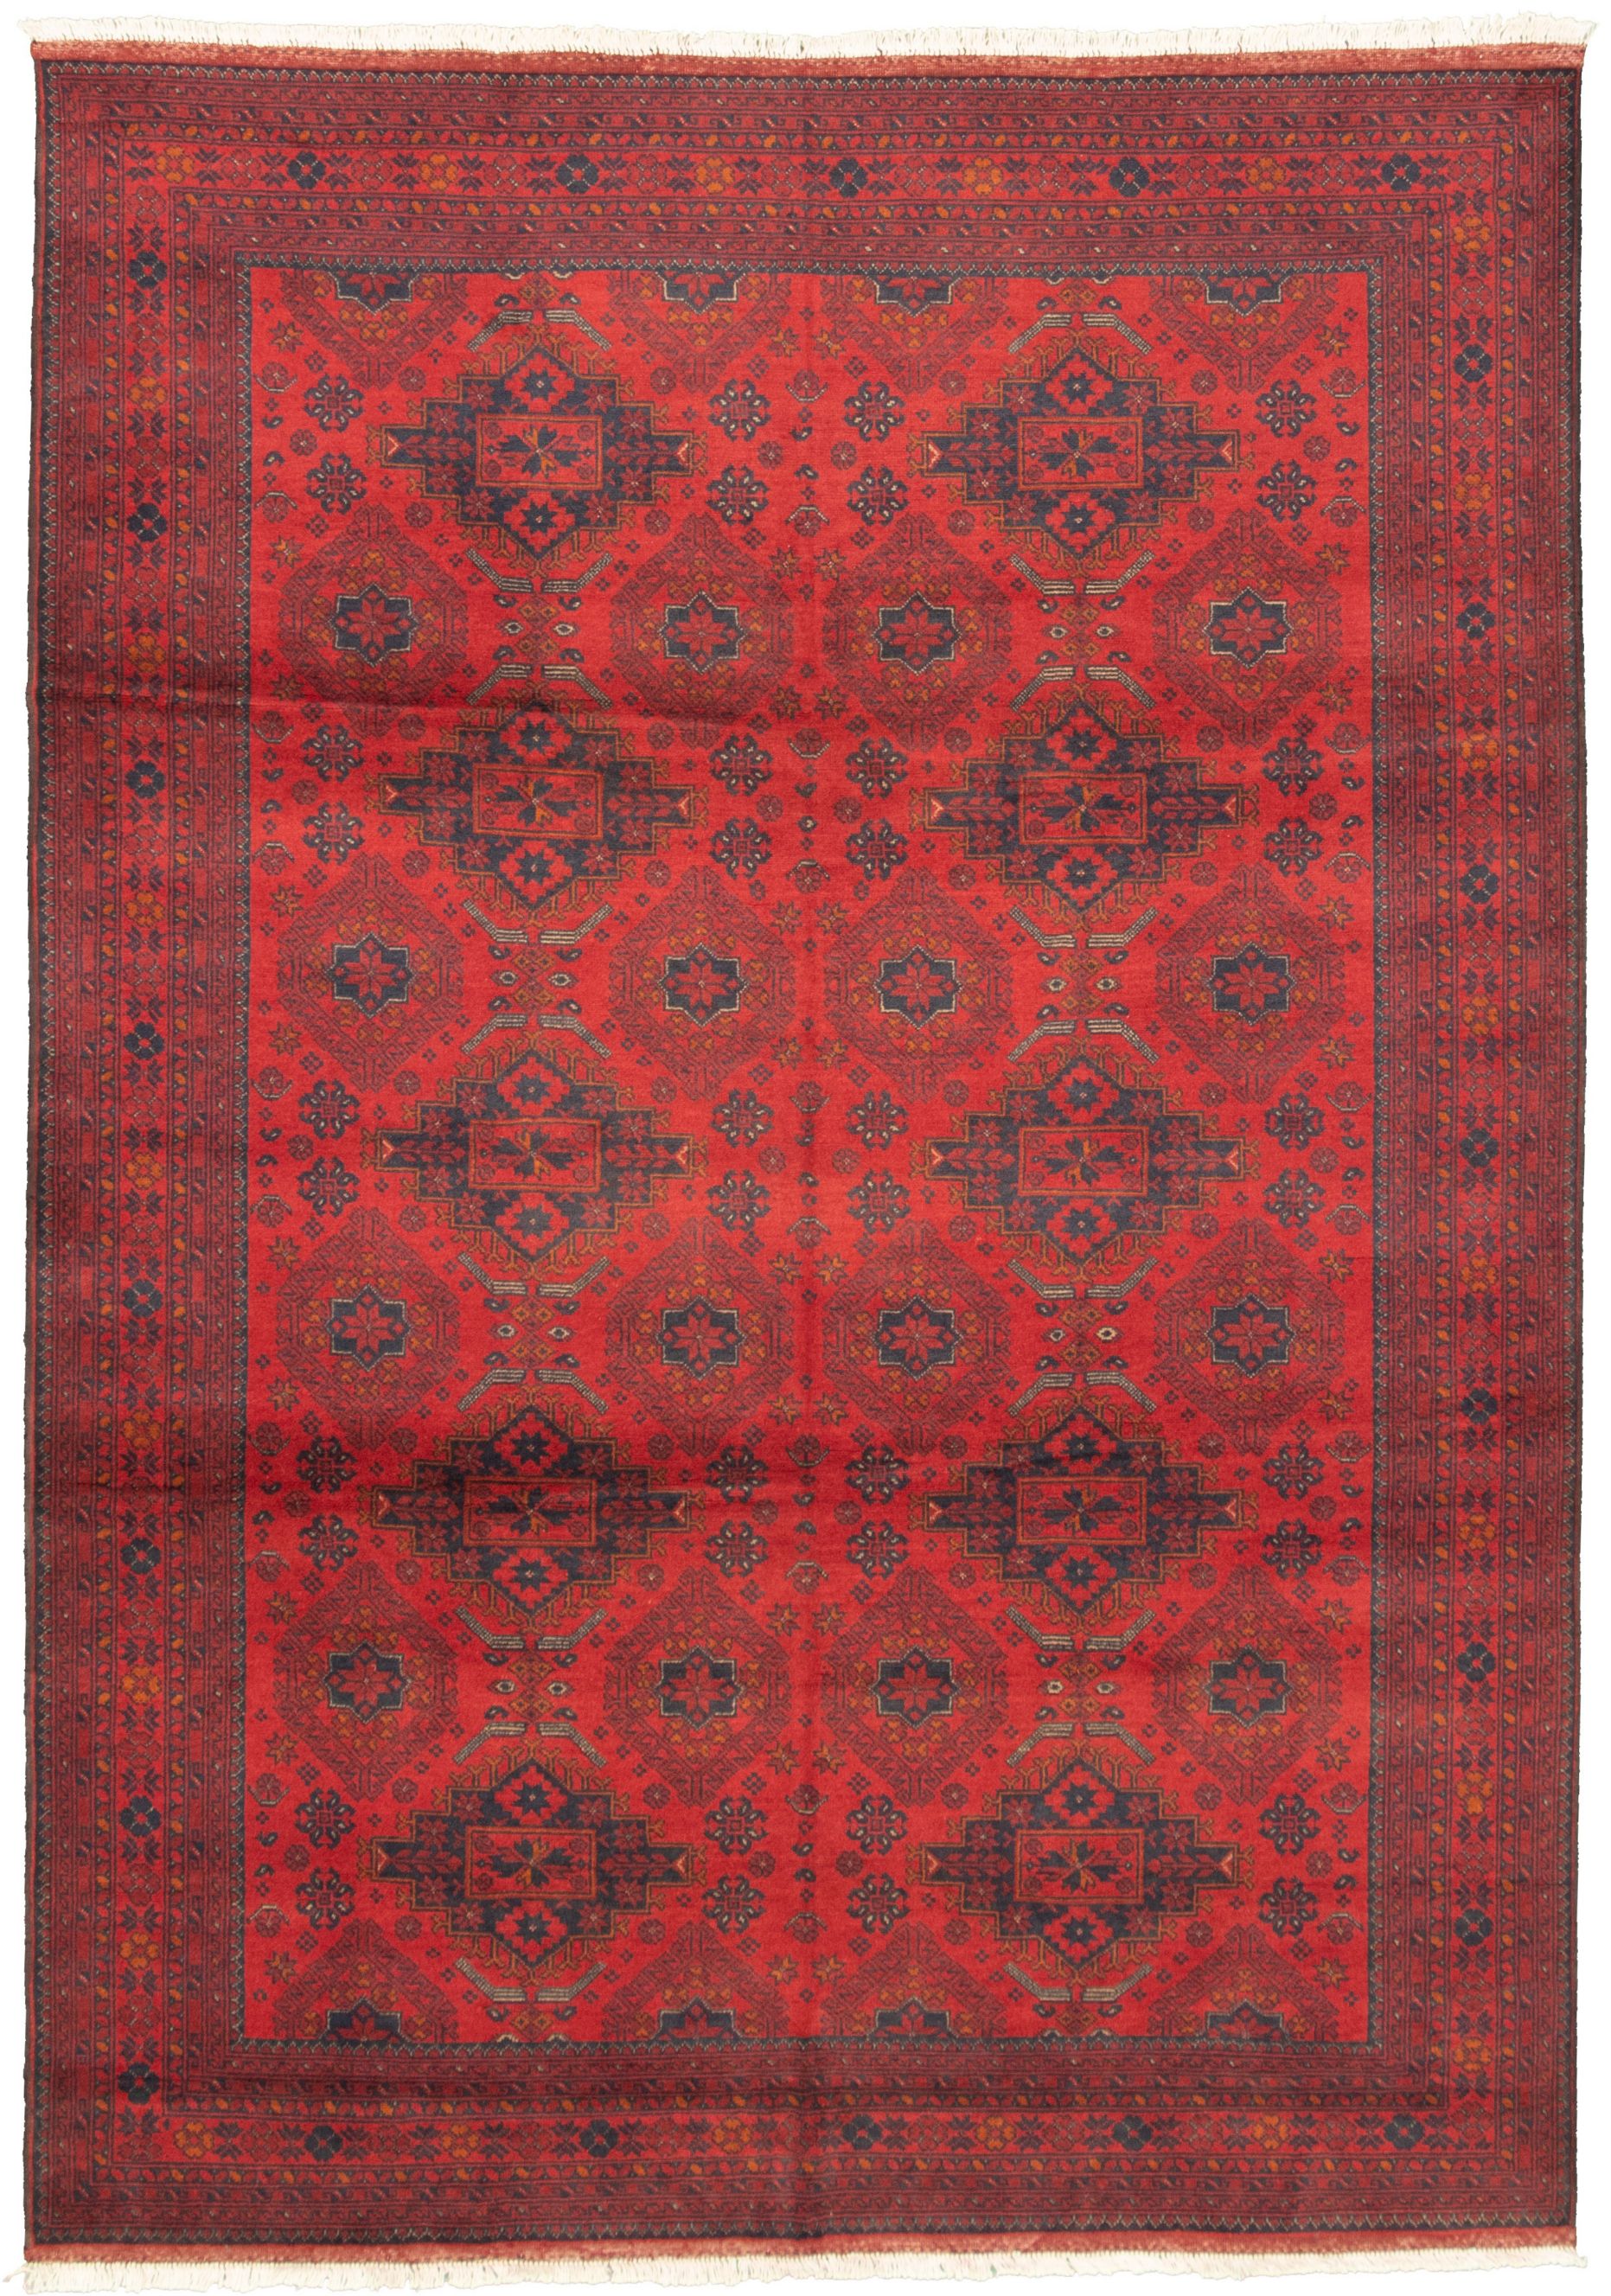 Hand-knotted Finest Khal Mohammadi Red Wool Rug 6'7" x 9'5"  Size: 6'7" x 9'5"  